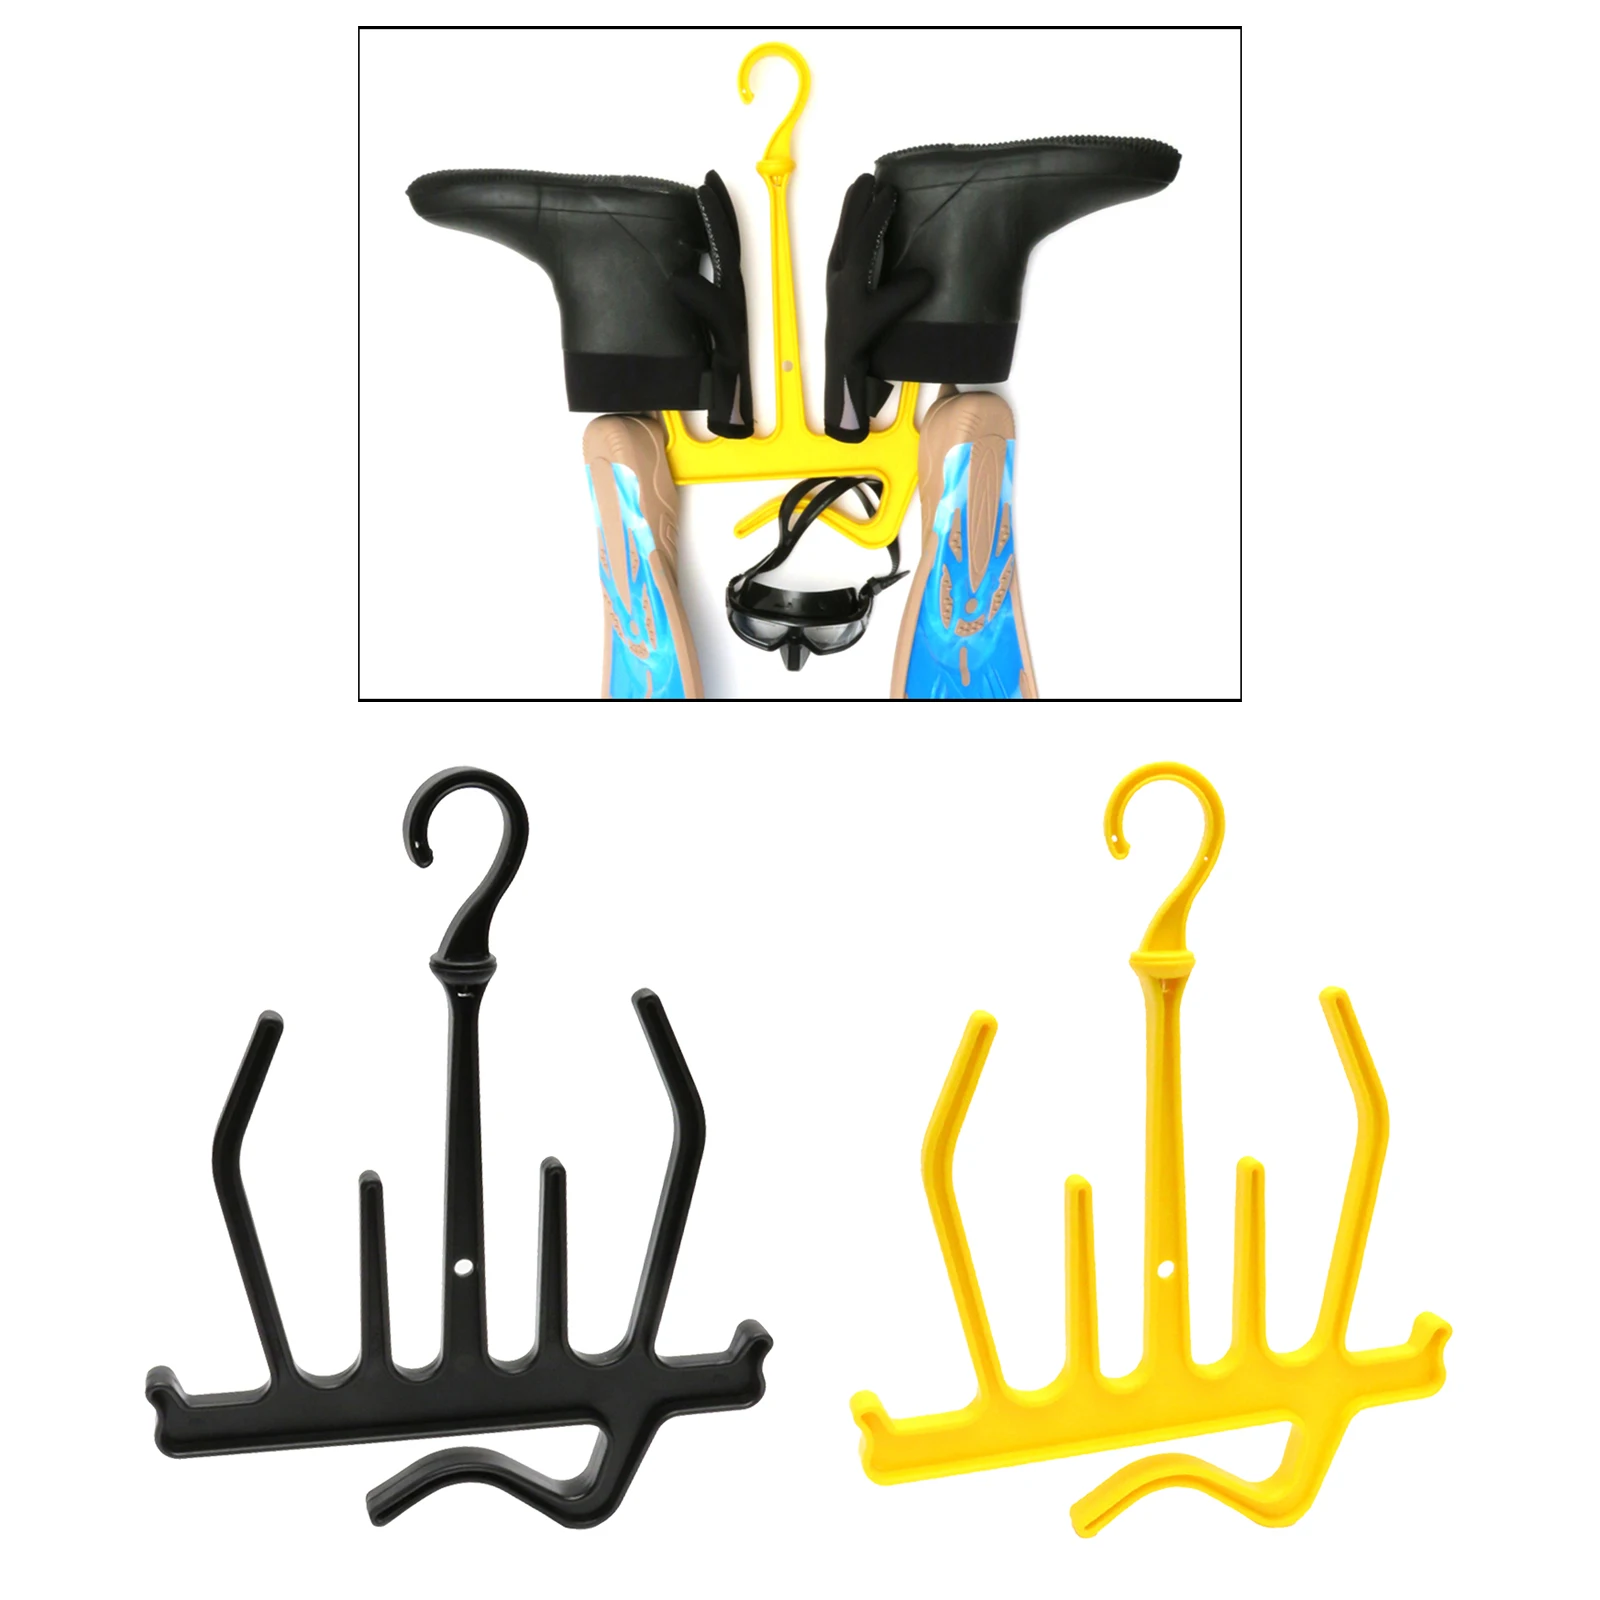 PP Diving Hanger Suit Boots Fast Drying Drain Hangers Surfing Wetsuit Gear Swimming Wetsuit Hanger Black/Yellow